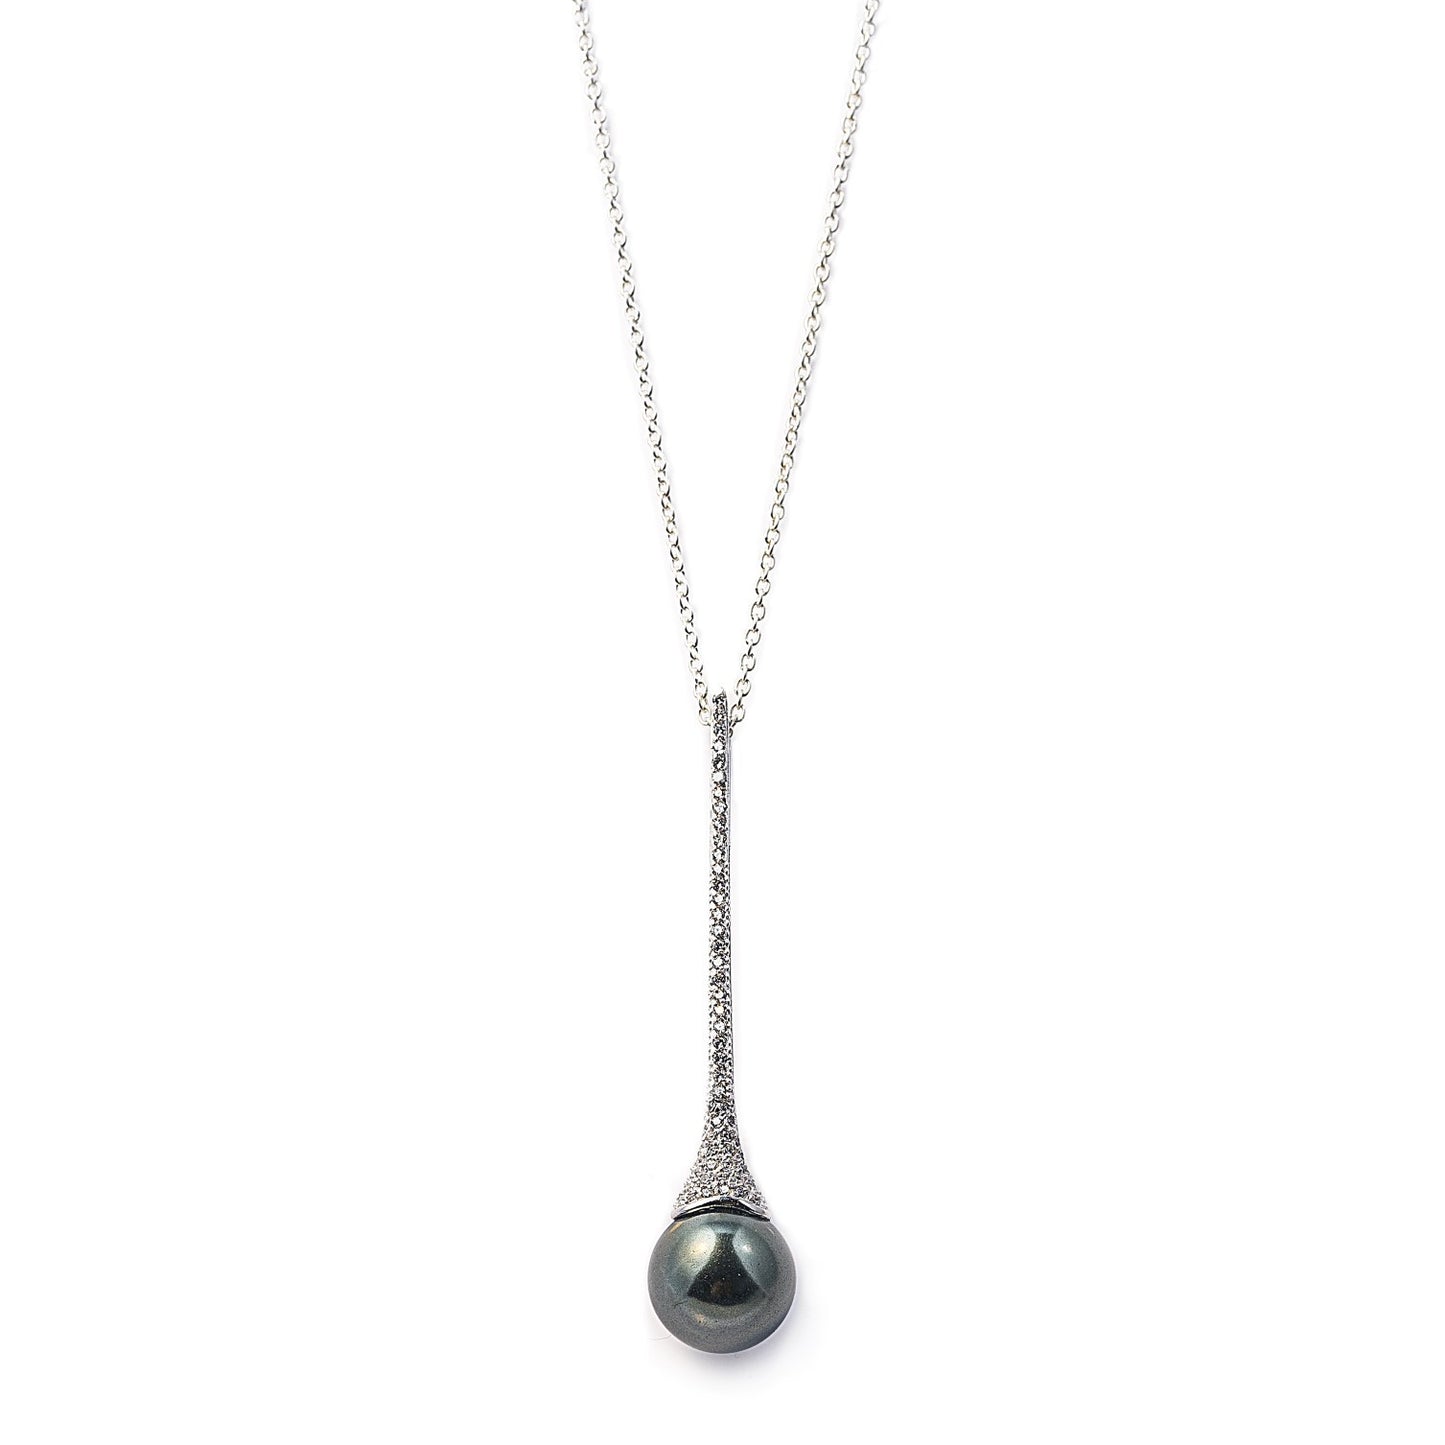 The Pearl Spear Necklace is a stunning ocean inspired spear pendant encrusted with Cubic Zirconia stones holding a single black pearl. Worldwide shipping. Affordable luxury jewellery by Bellagio & Co.